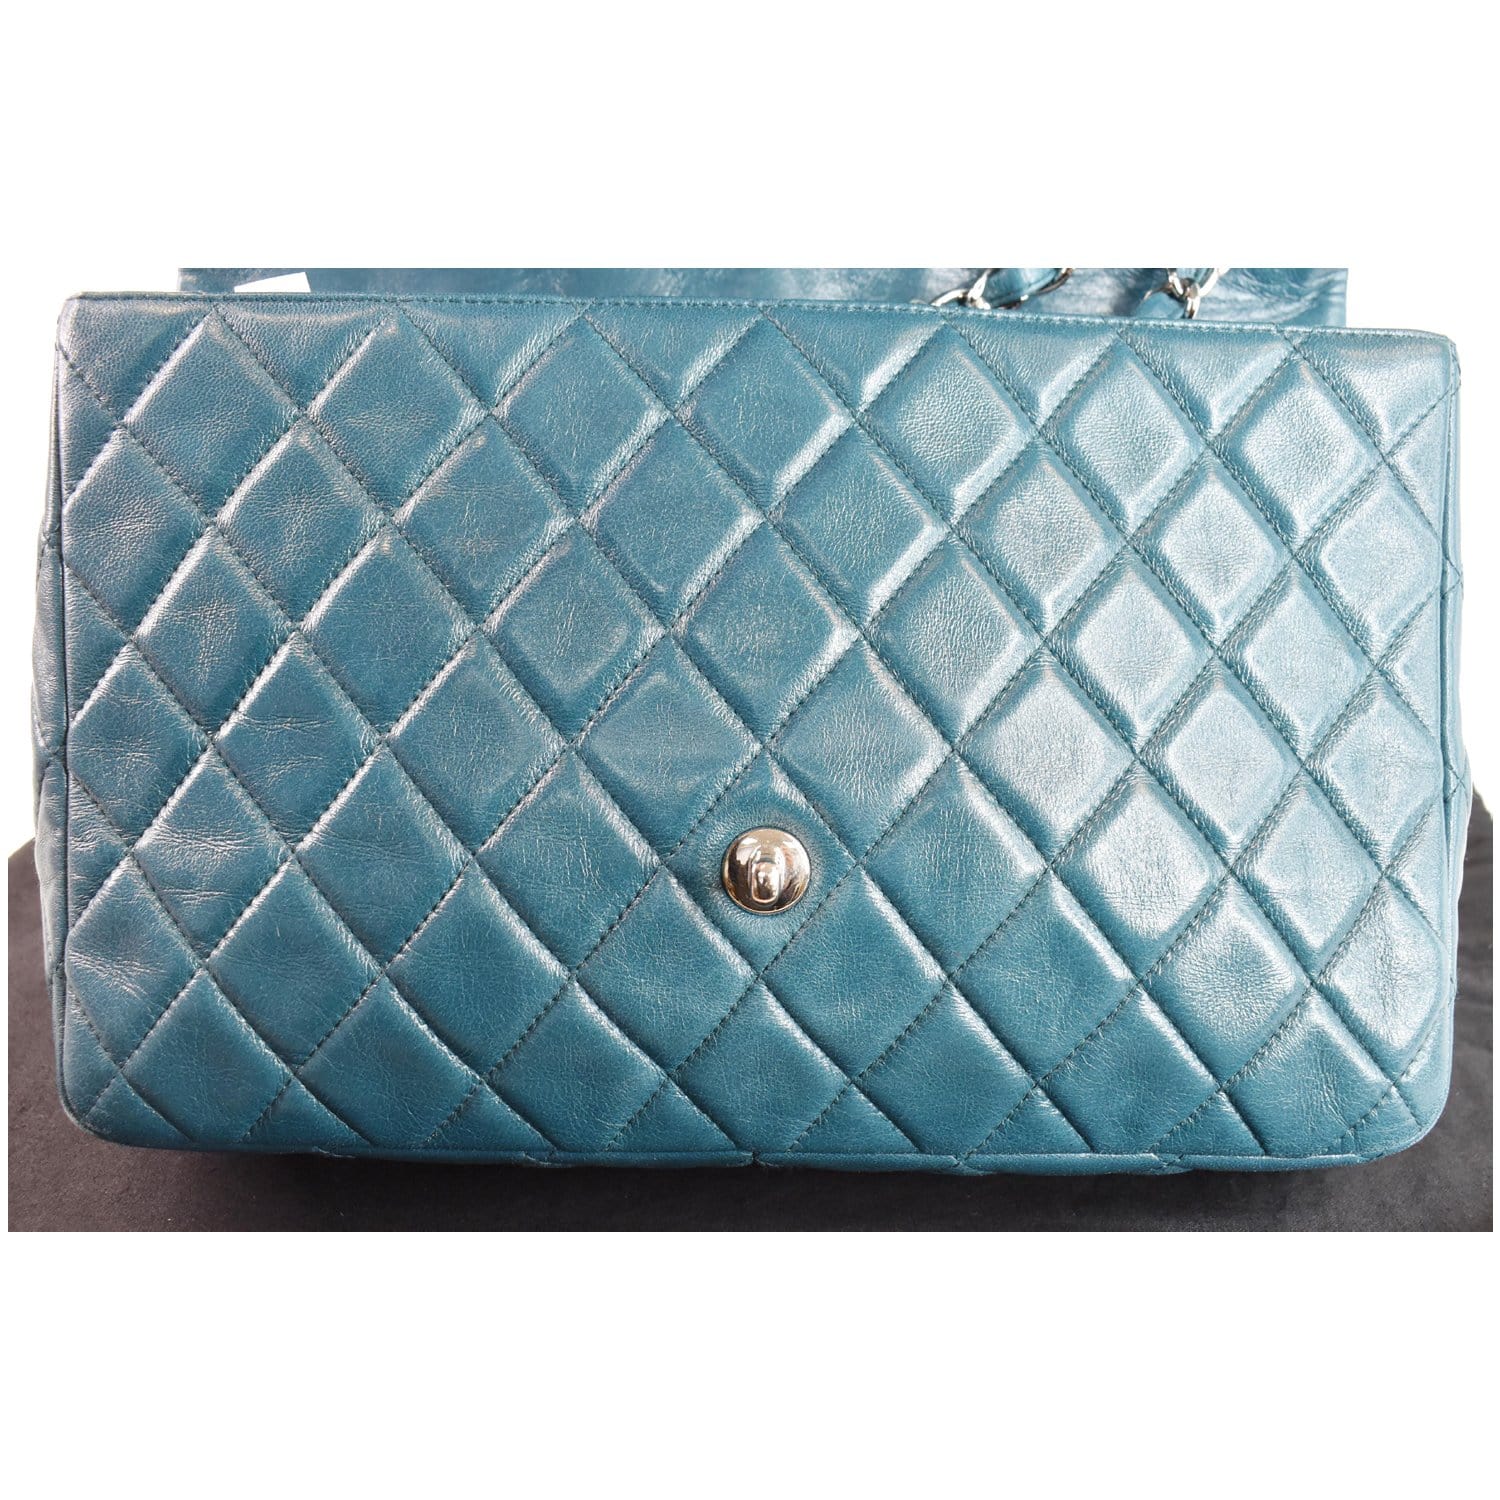 turquoise chanel flap bag